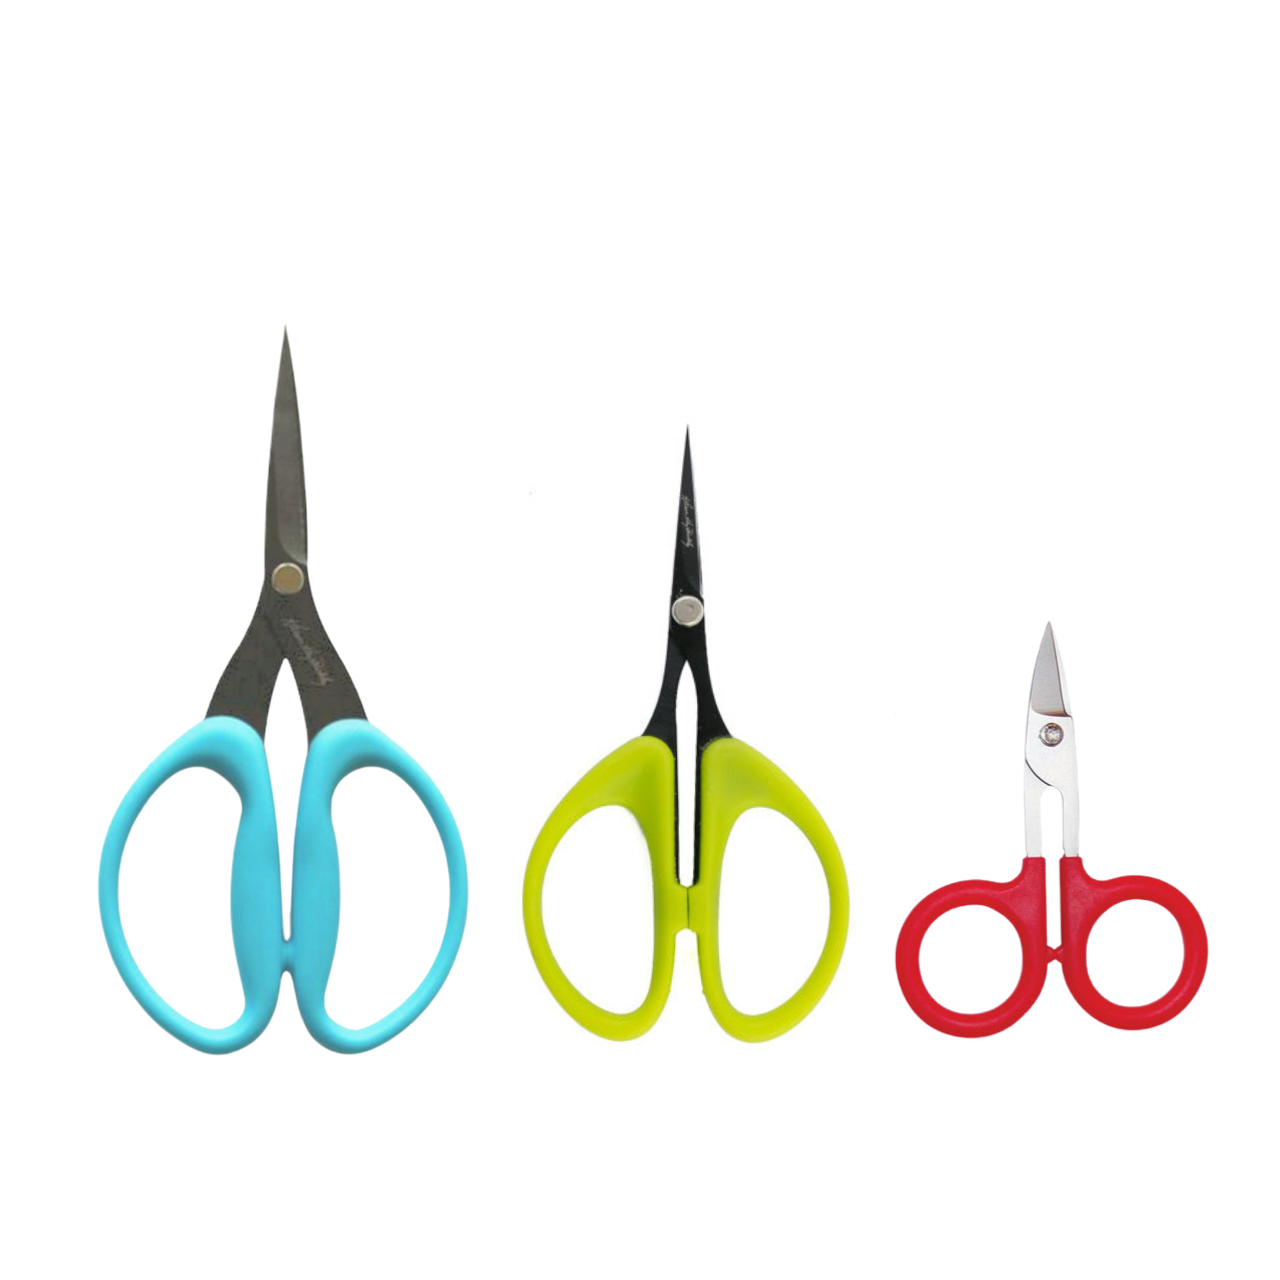 Micro Serrated Perfect Scissors set 3 - Karen Kay Buckley available from 2 Sew Textiles - art quilt supplies